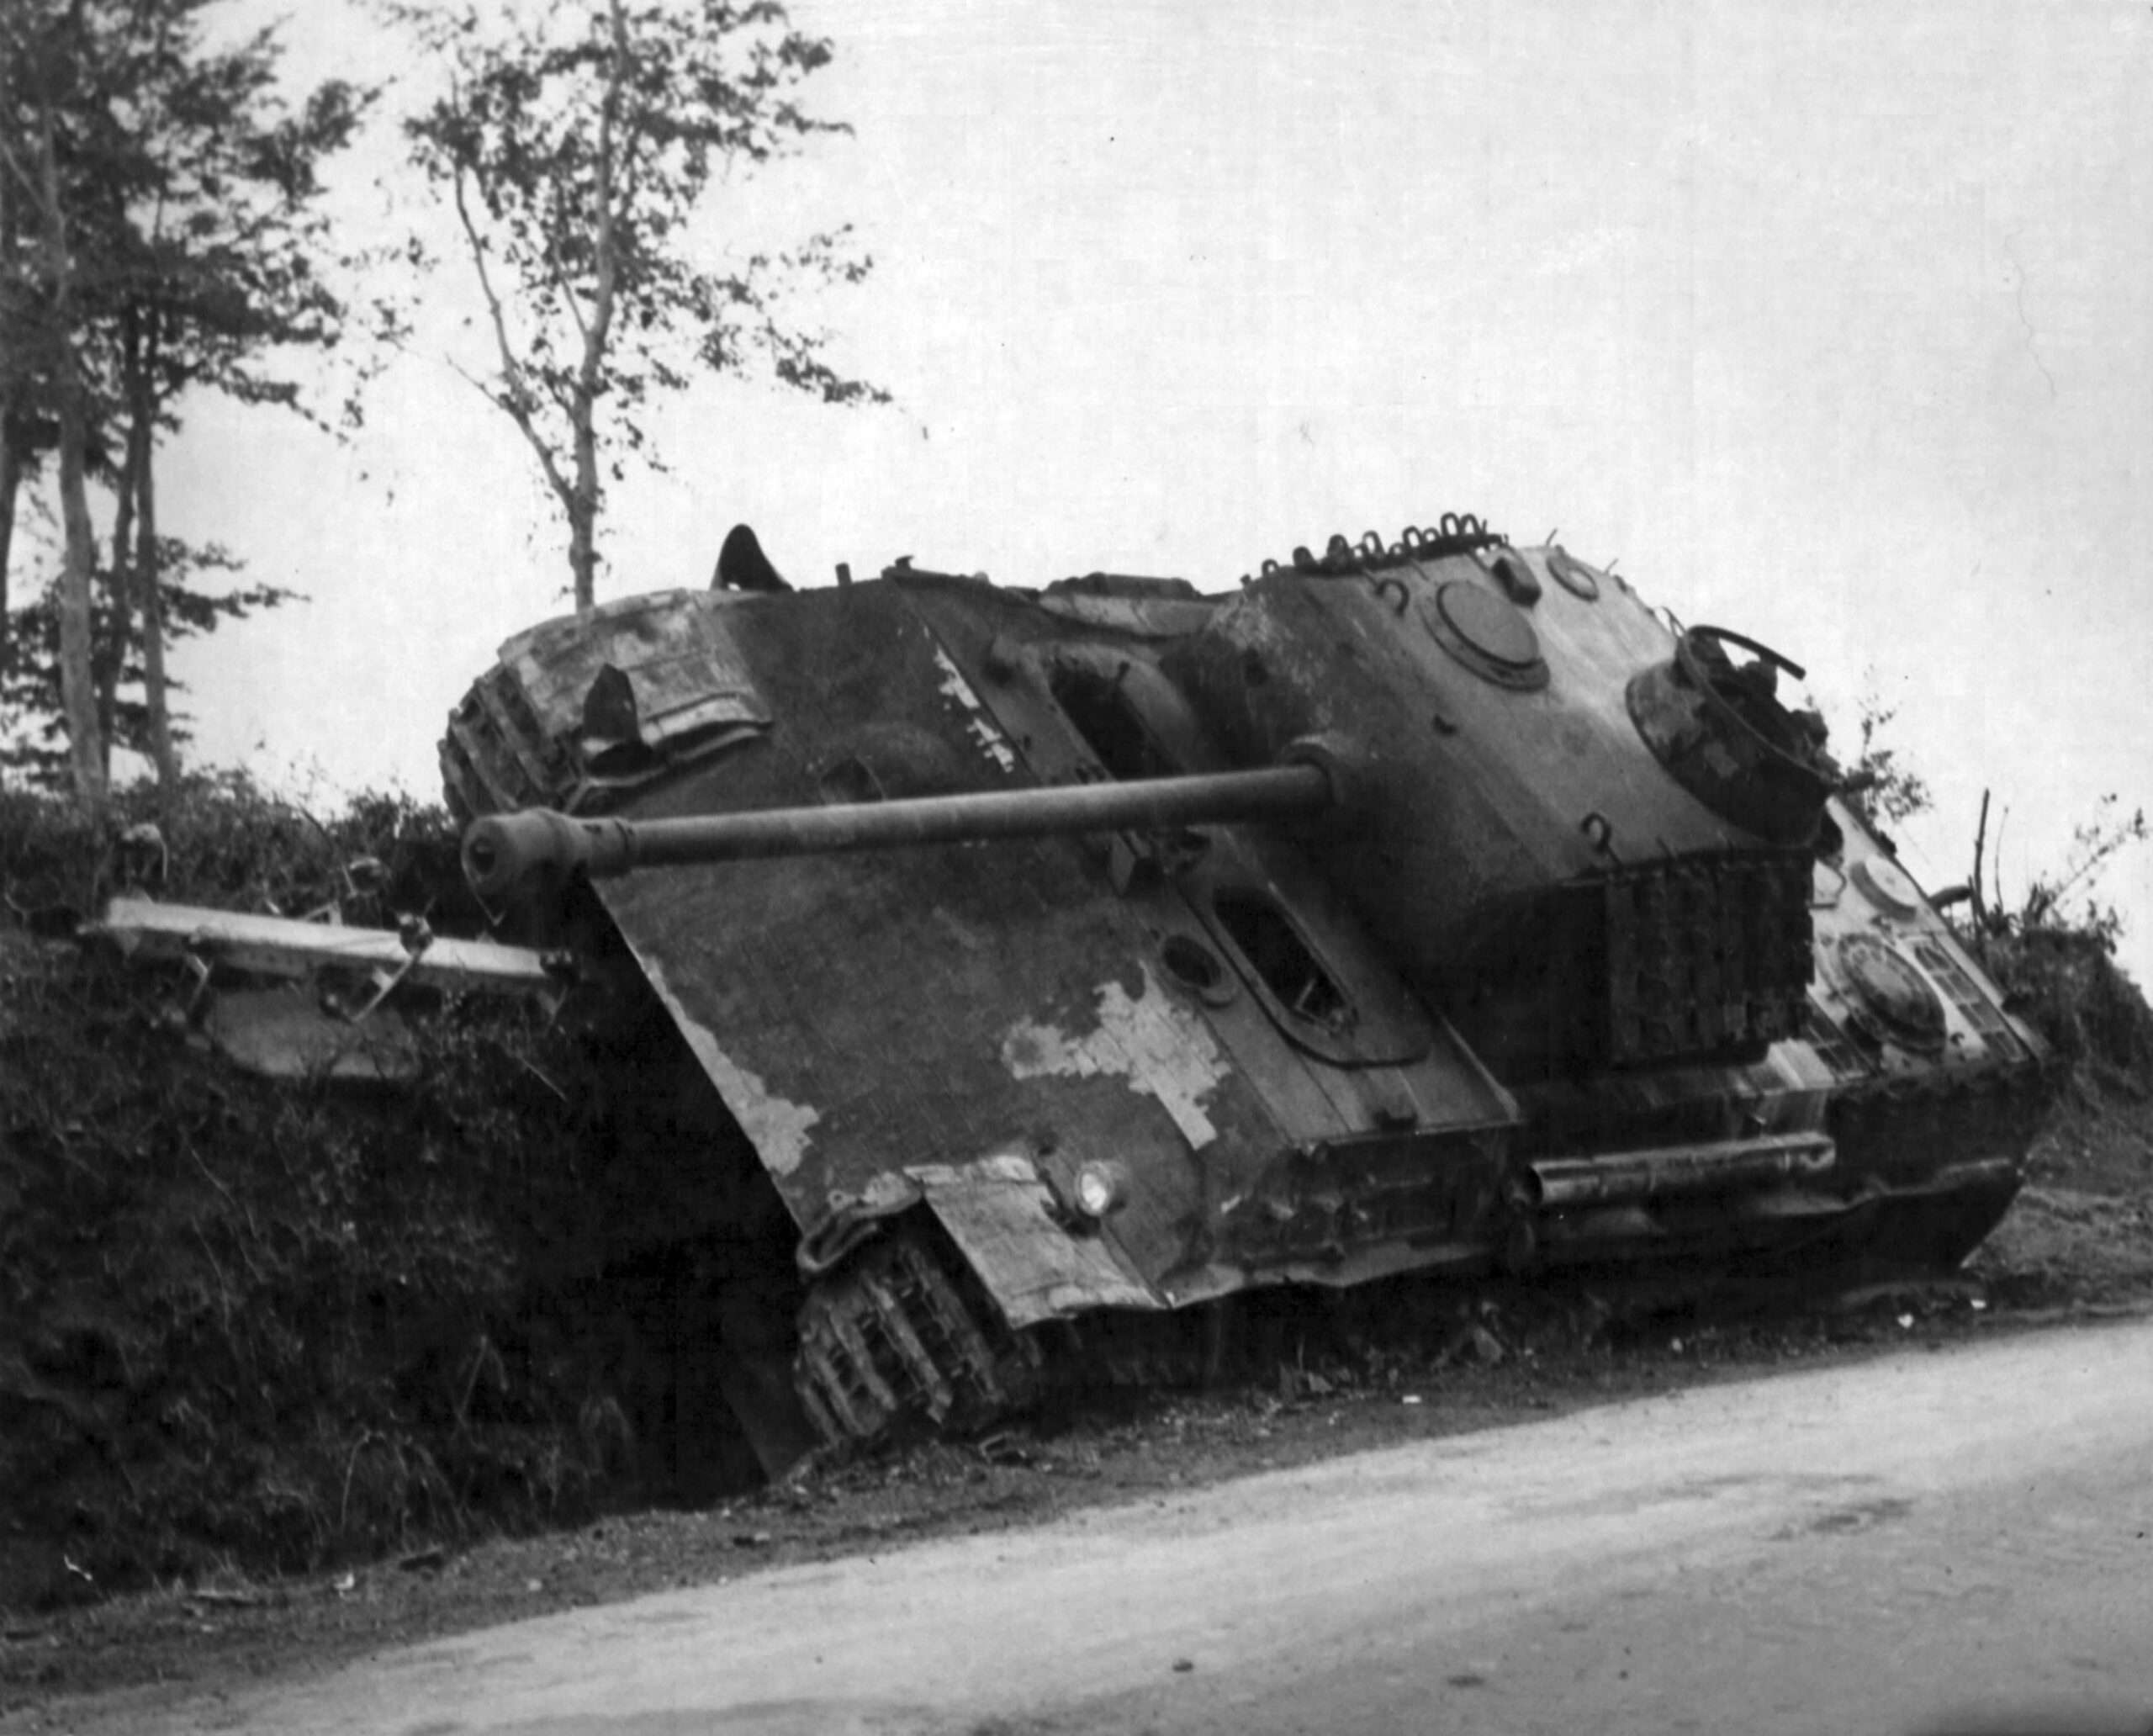 A German Panther Ausf G tank was captured somewhere in France on August 16, 1944